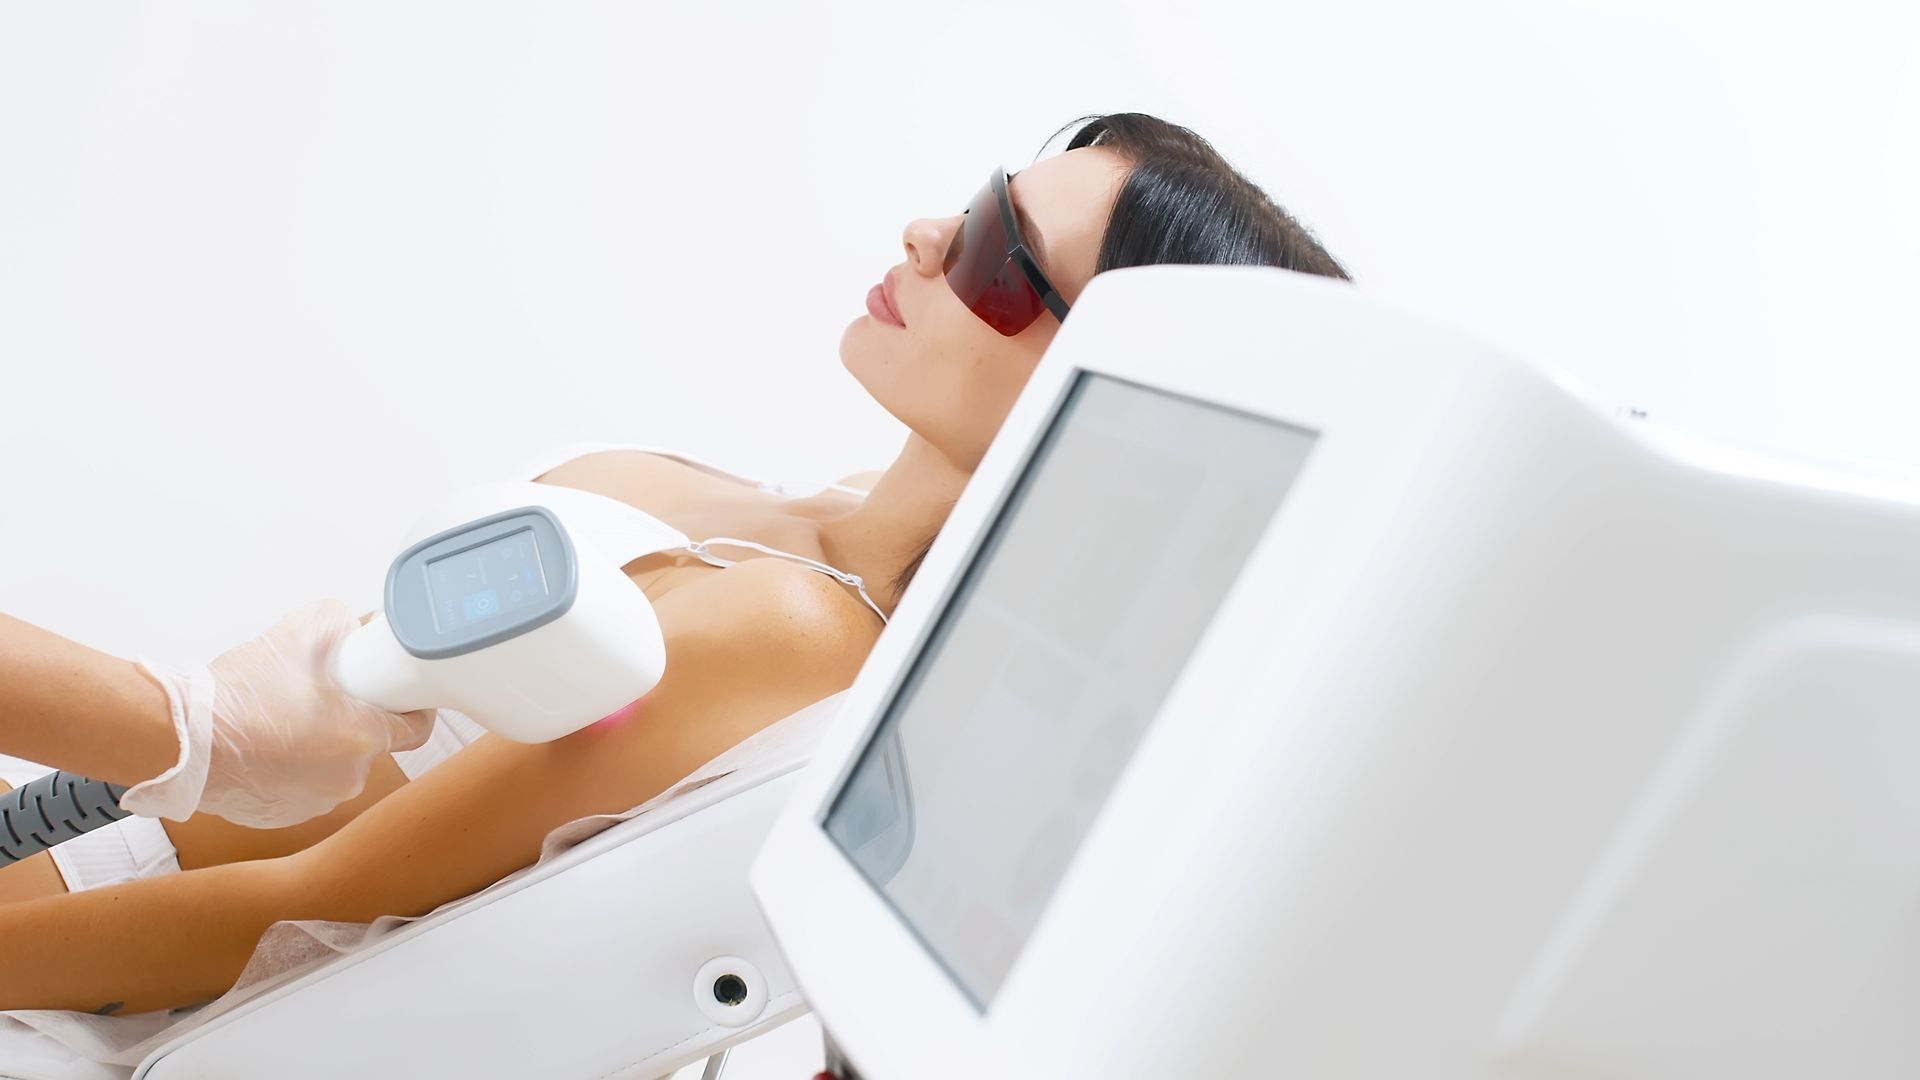 woman receives lasertreatment